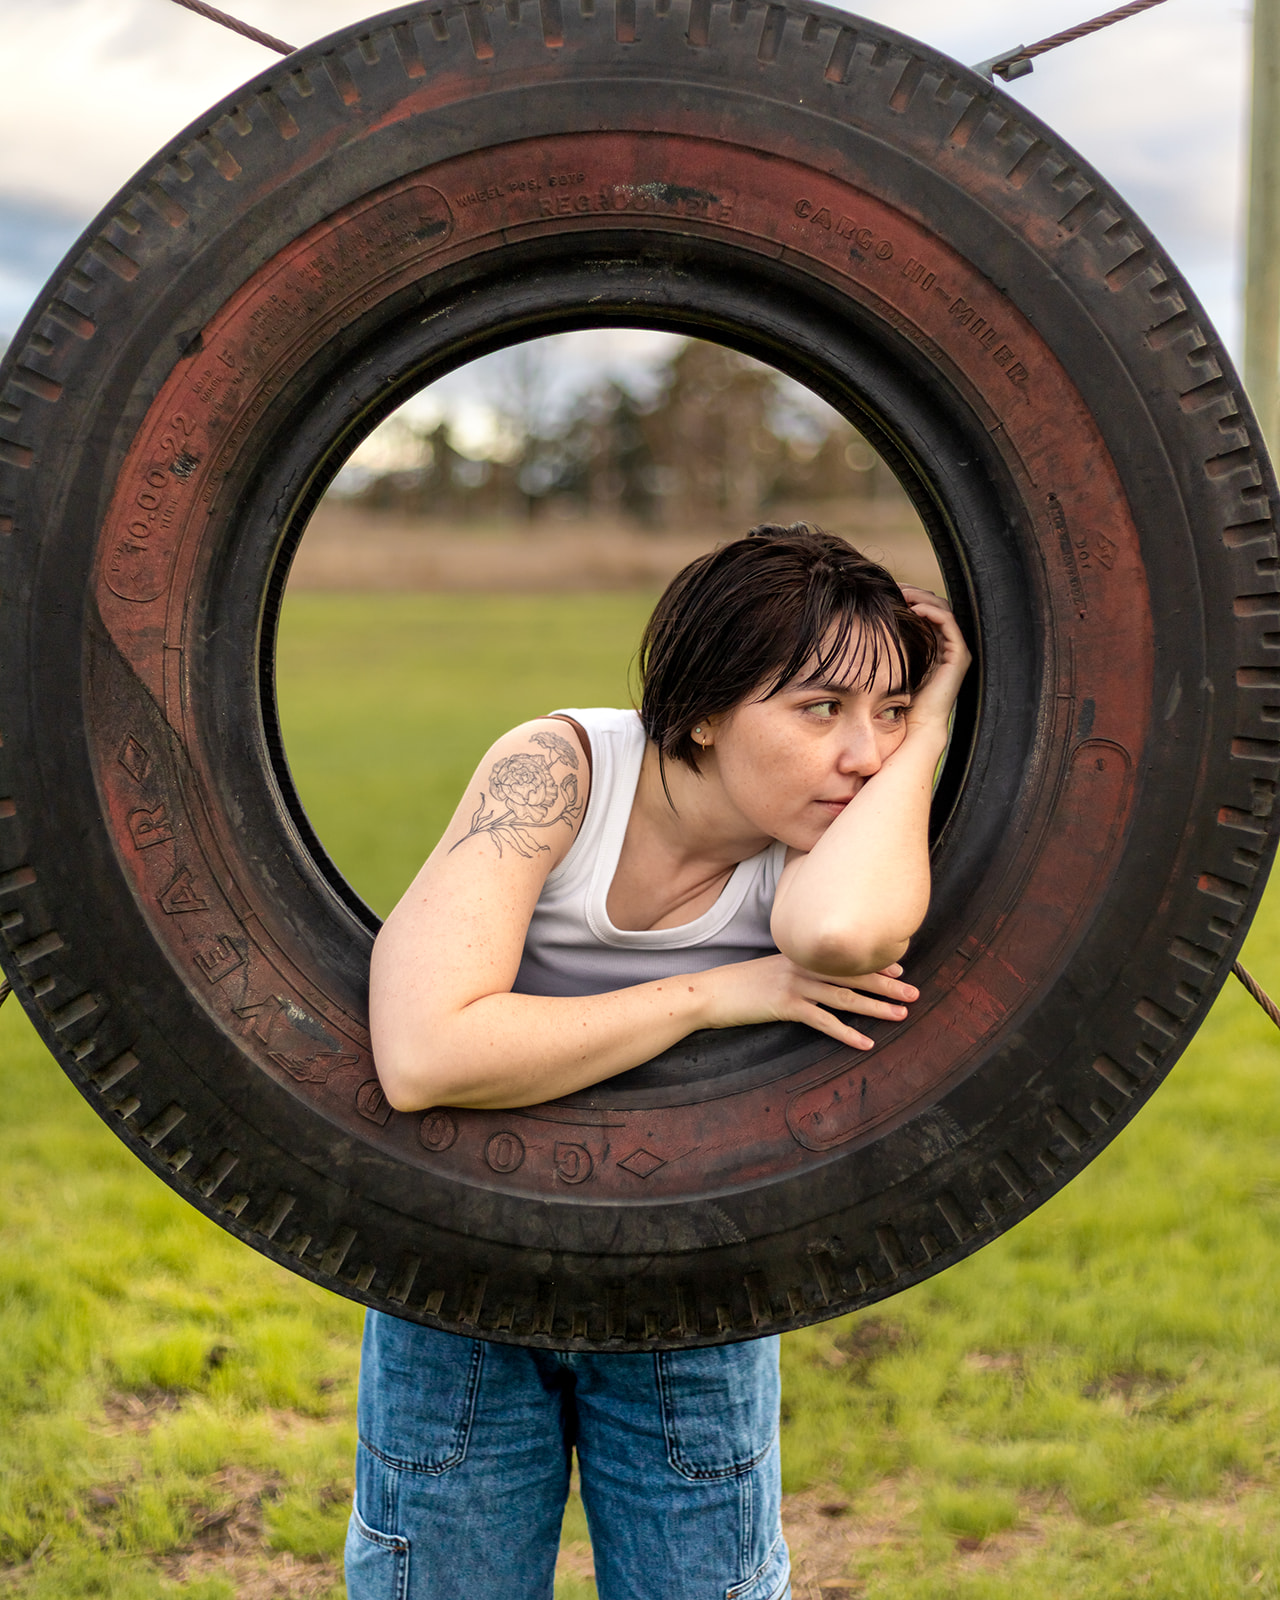 genderfull person leans on tire